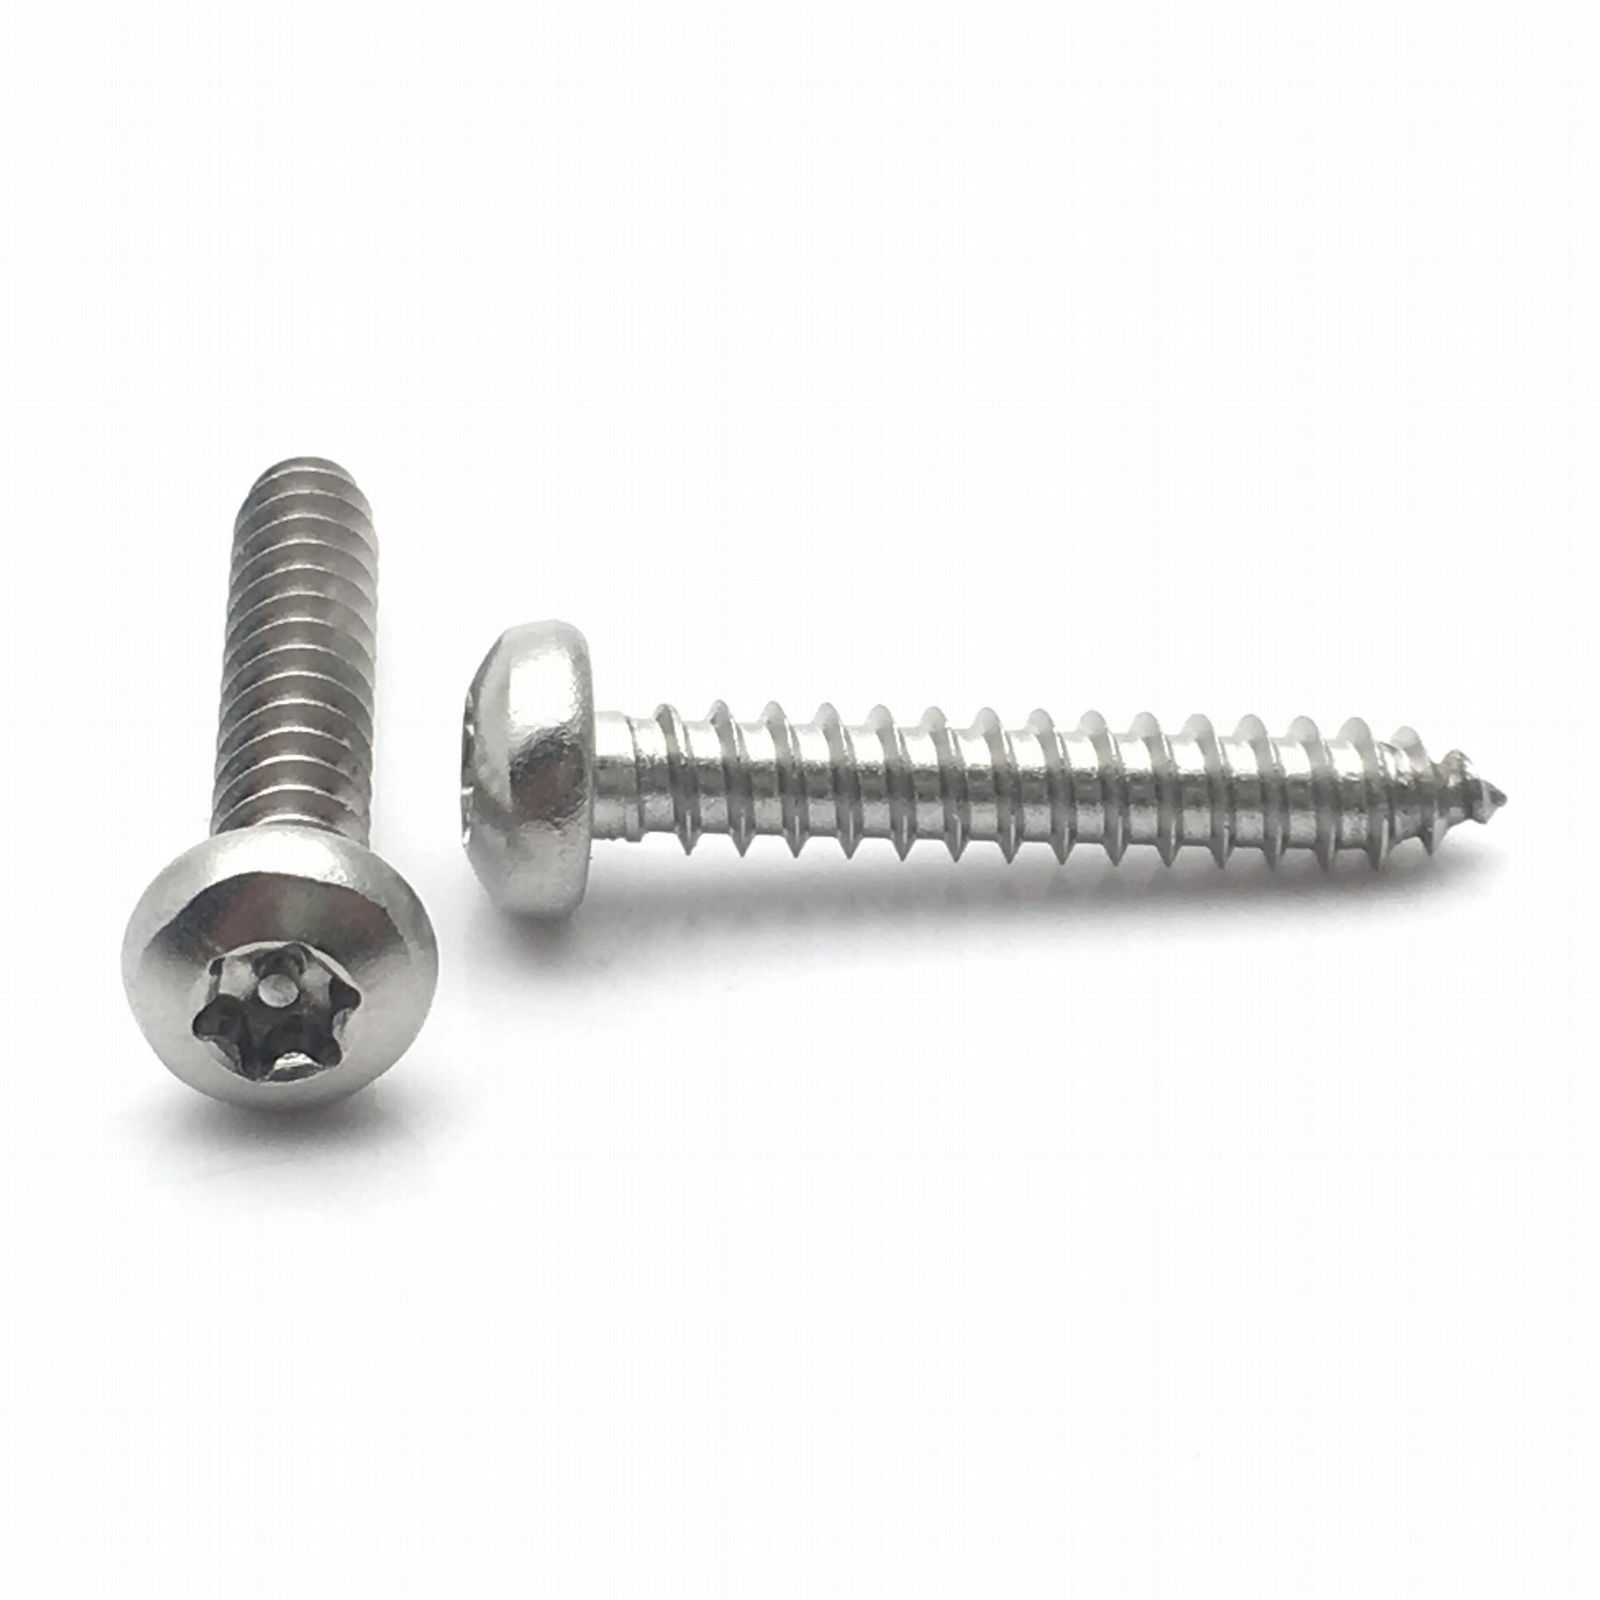  Stainless steel 304 Torx Pin-In pan head drive tapping screws 5